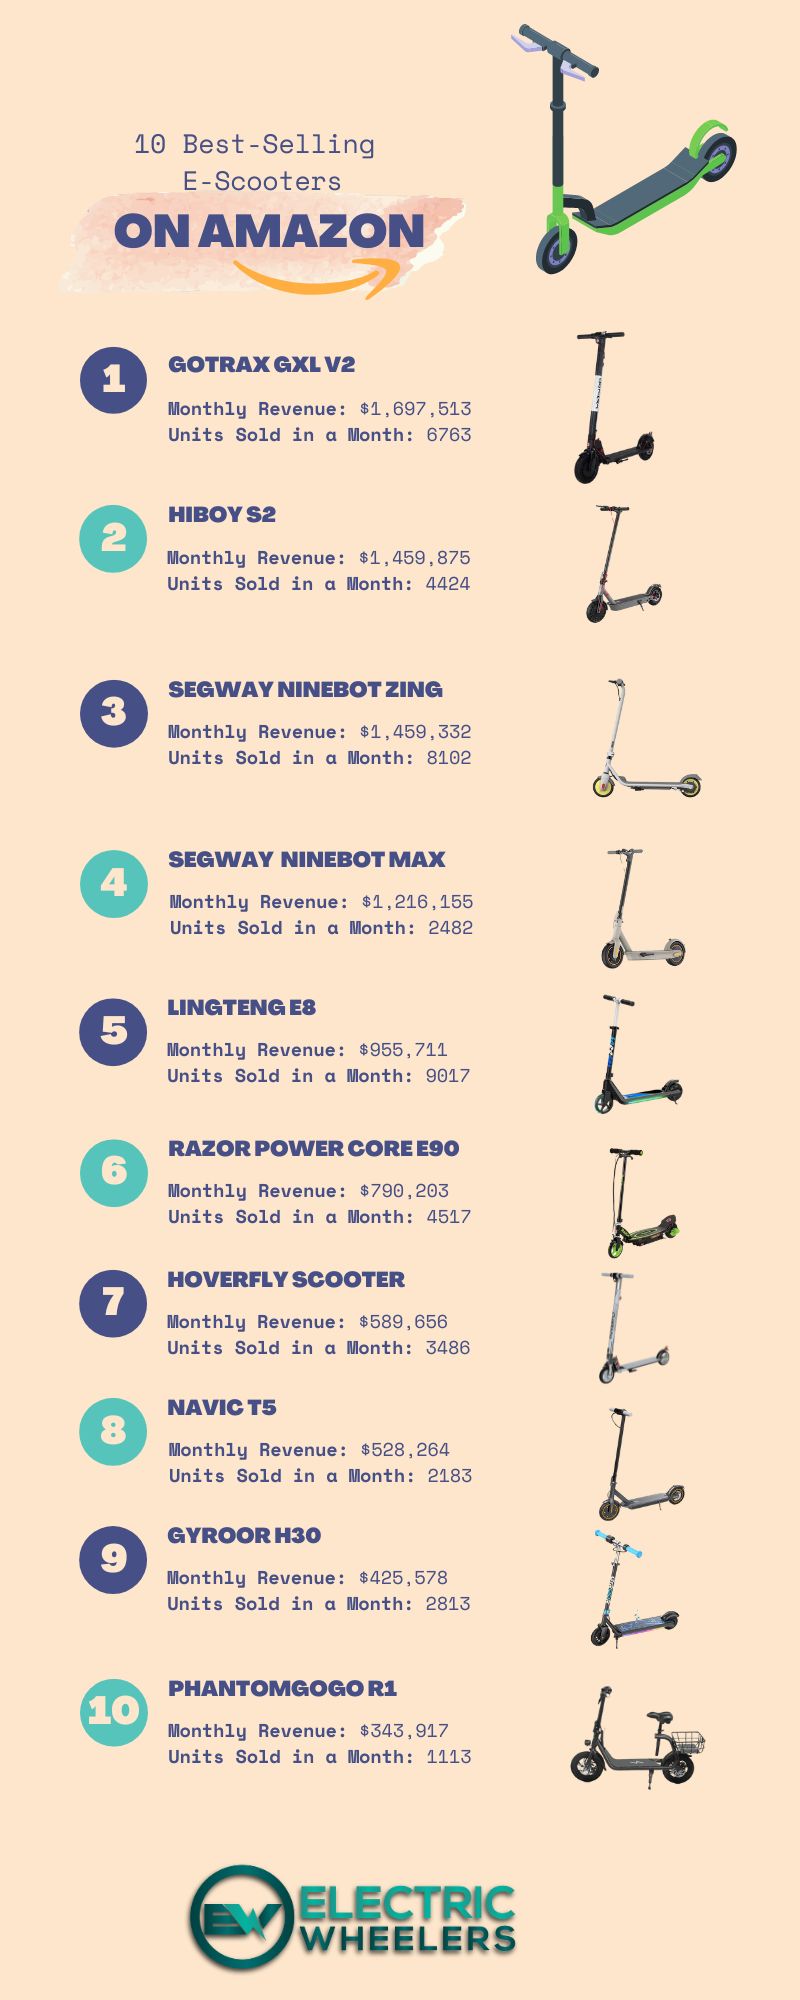 infographic of the best-selling electric scooters on Amazon